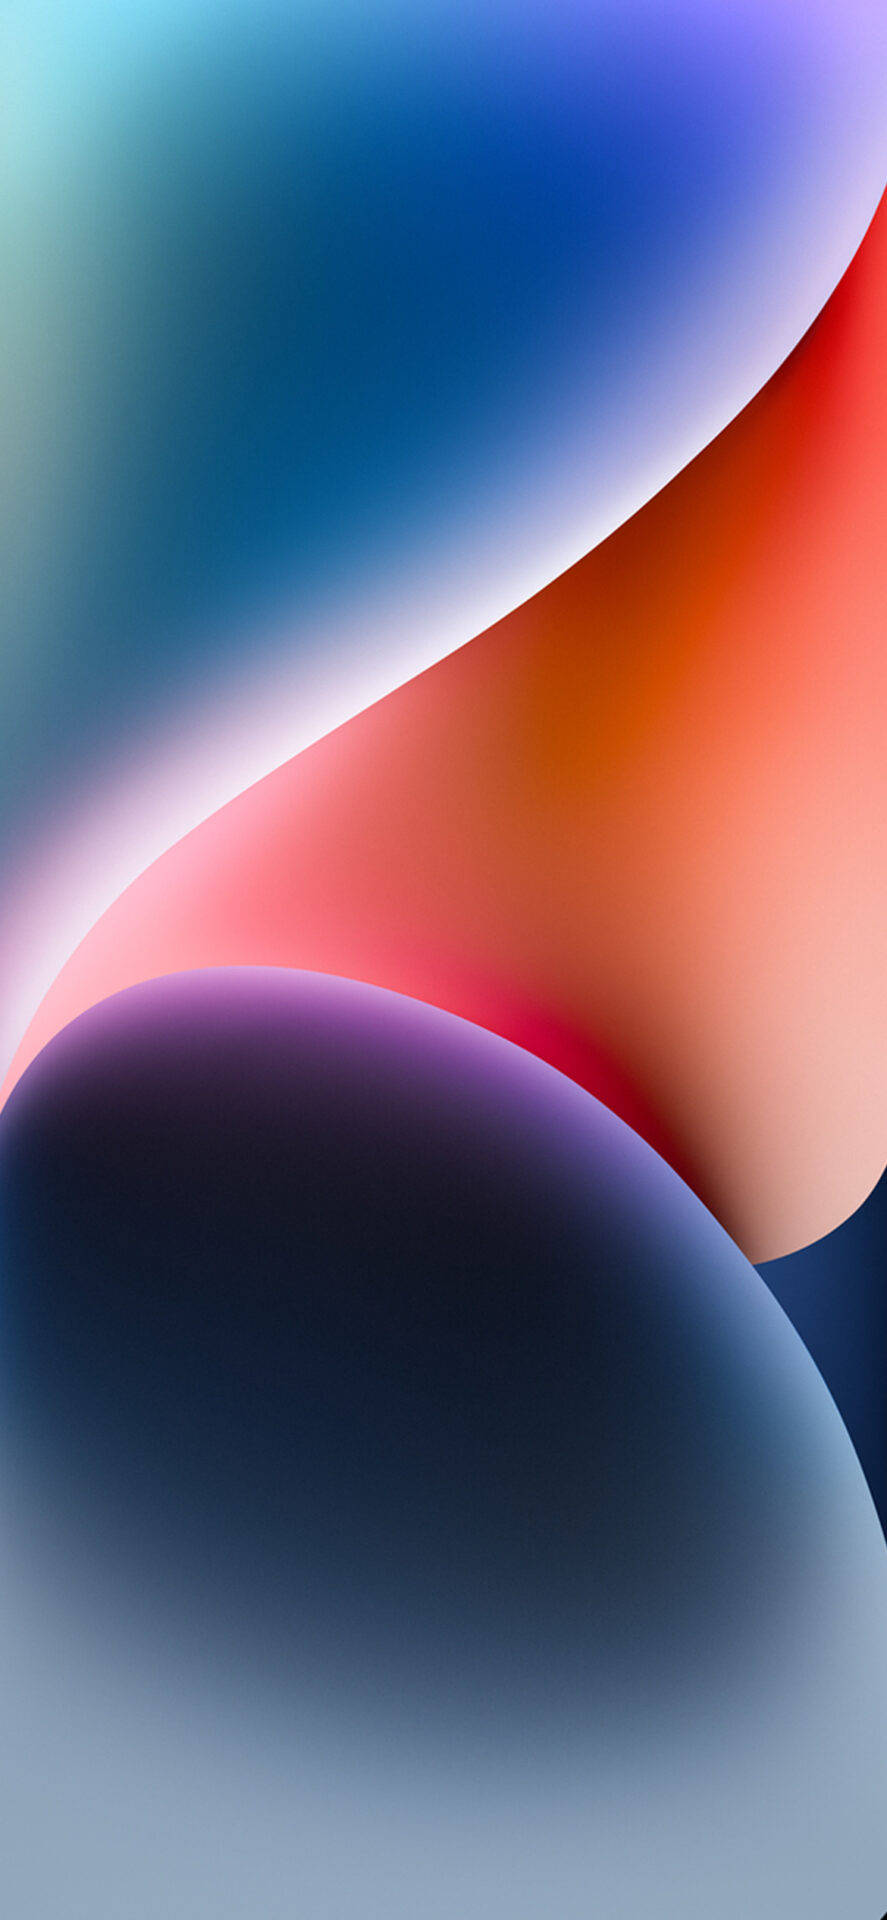 Download The New Pearly Pink Iphone Xr Wallpaper | Wallpapers.com